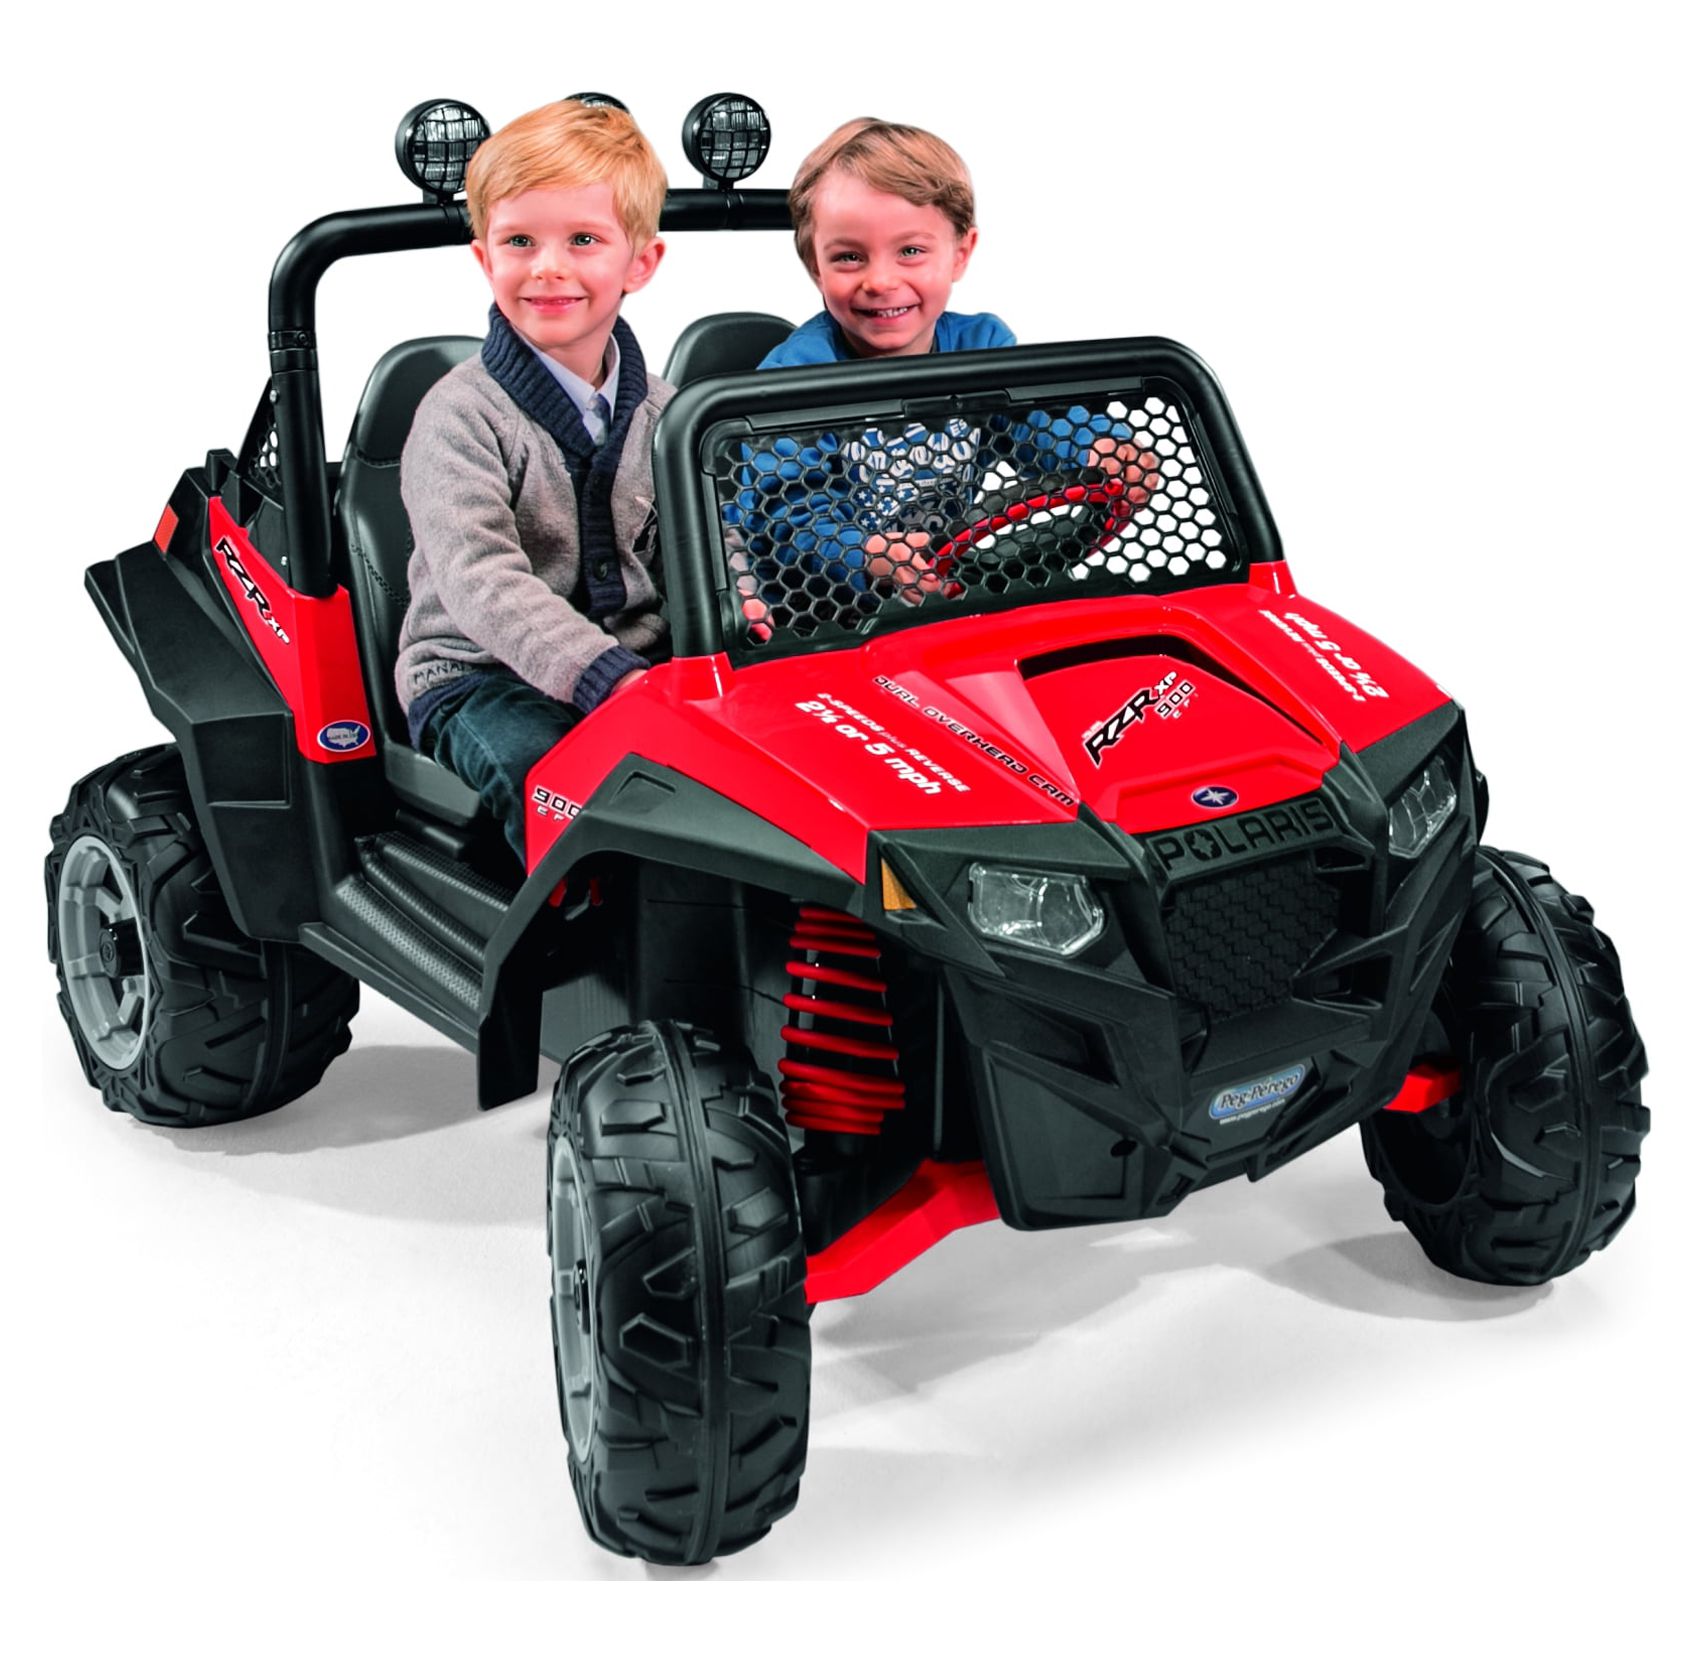 Peg Perego Polaris Ranger RZR 900 12-Volt Battery-Powered Ride-On, Red - image 1 of 9